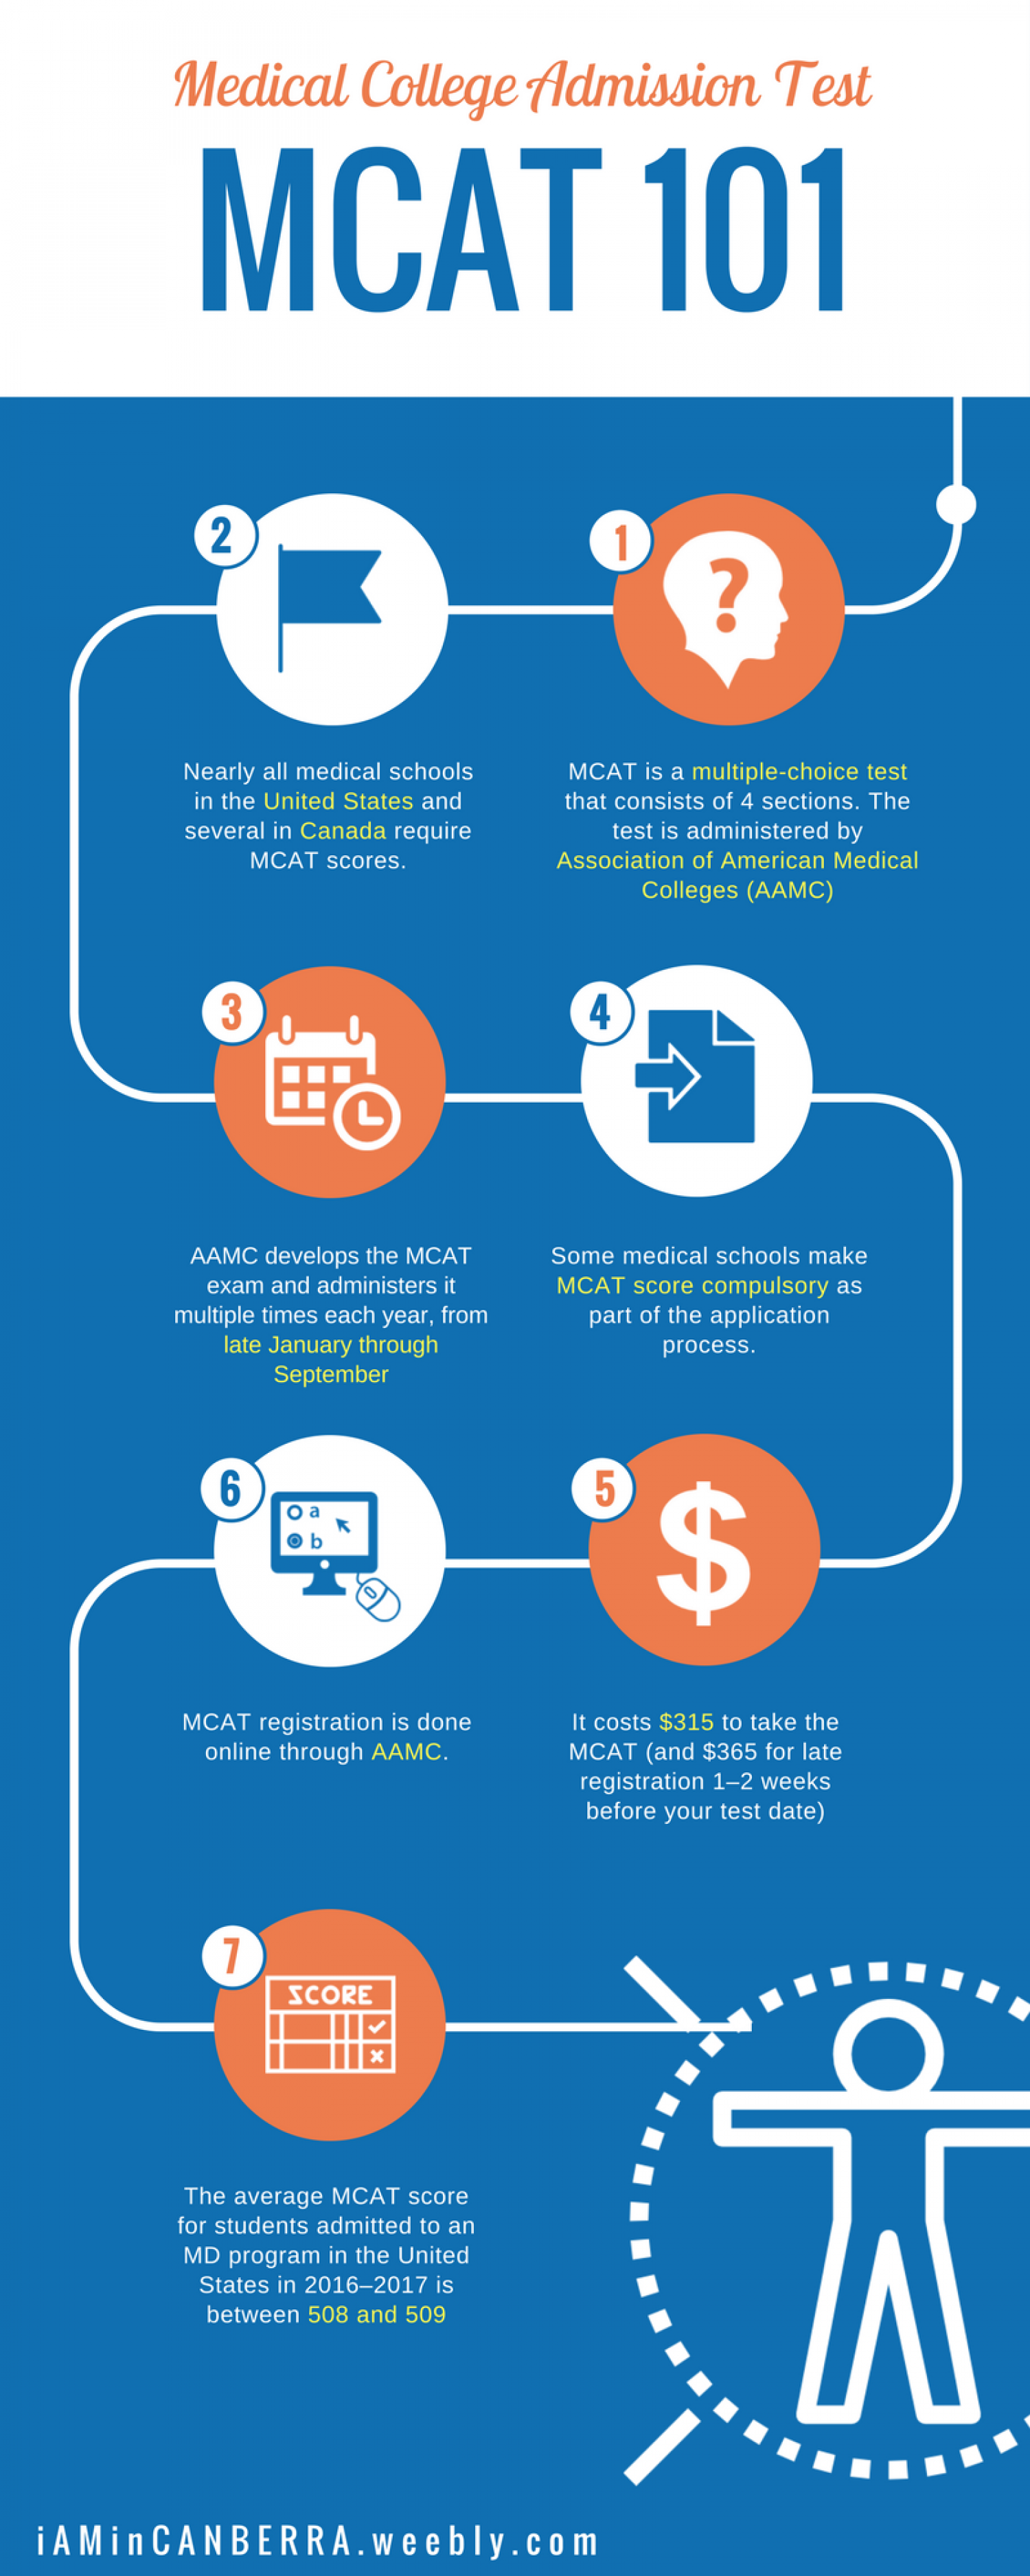 MCAT 101 - About MCAT Exam You Need to Know Infographic